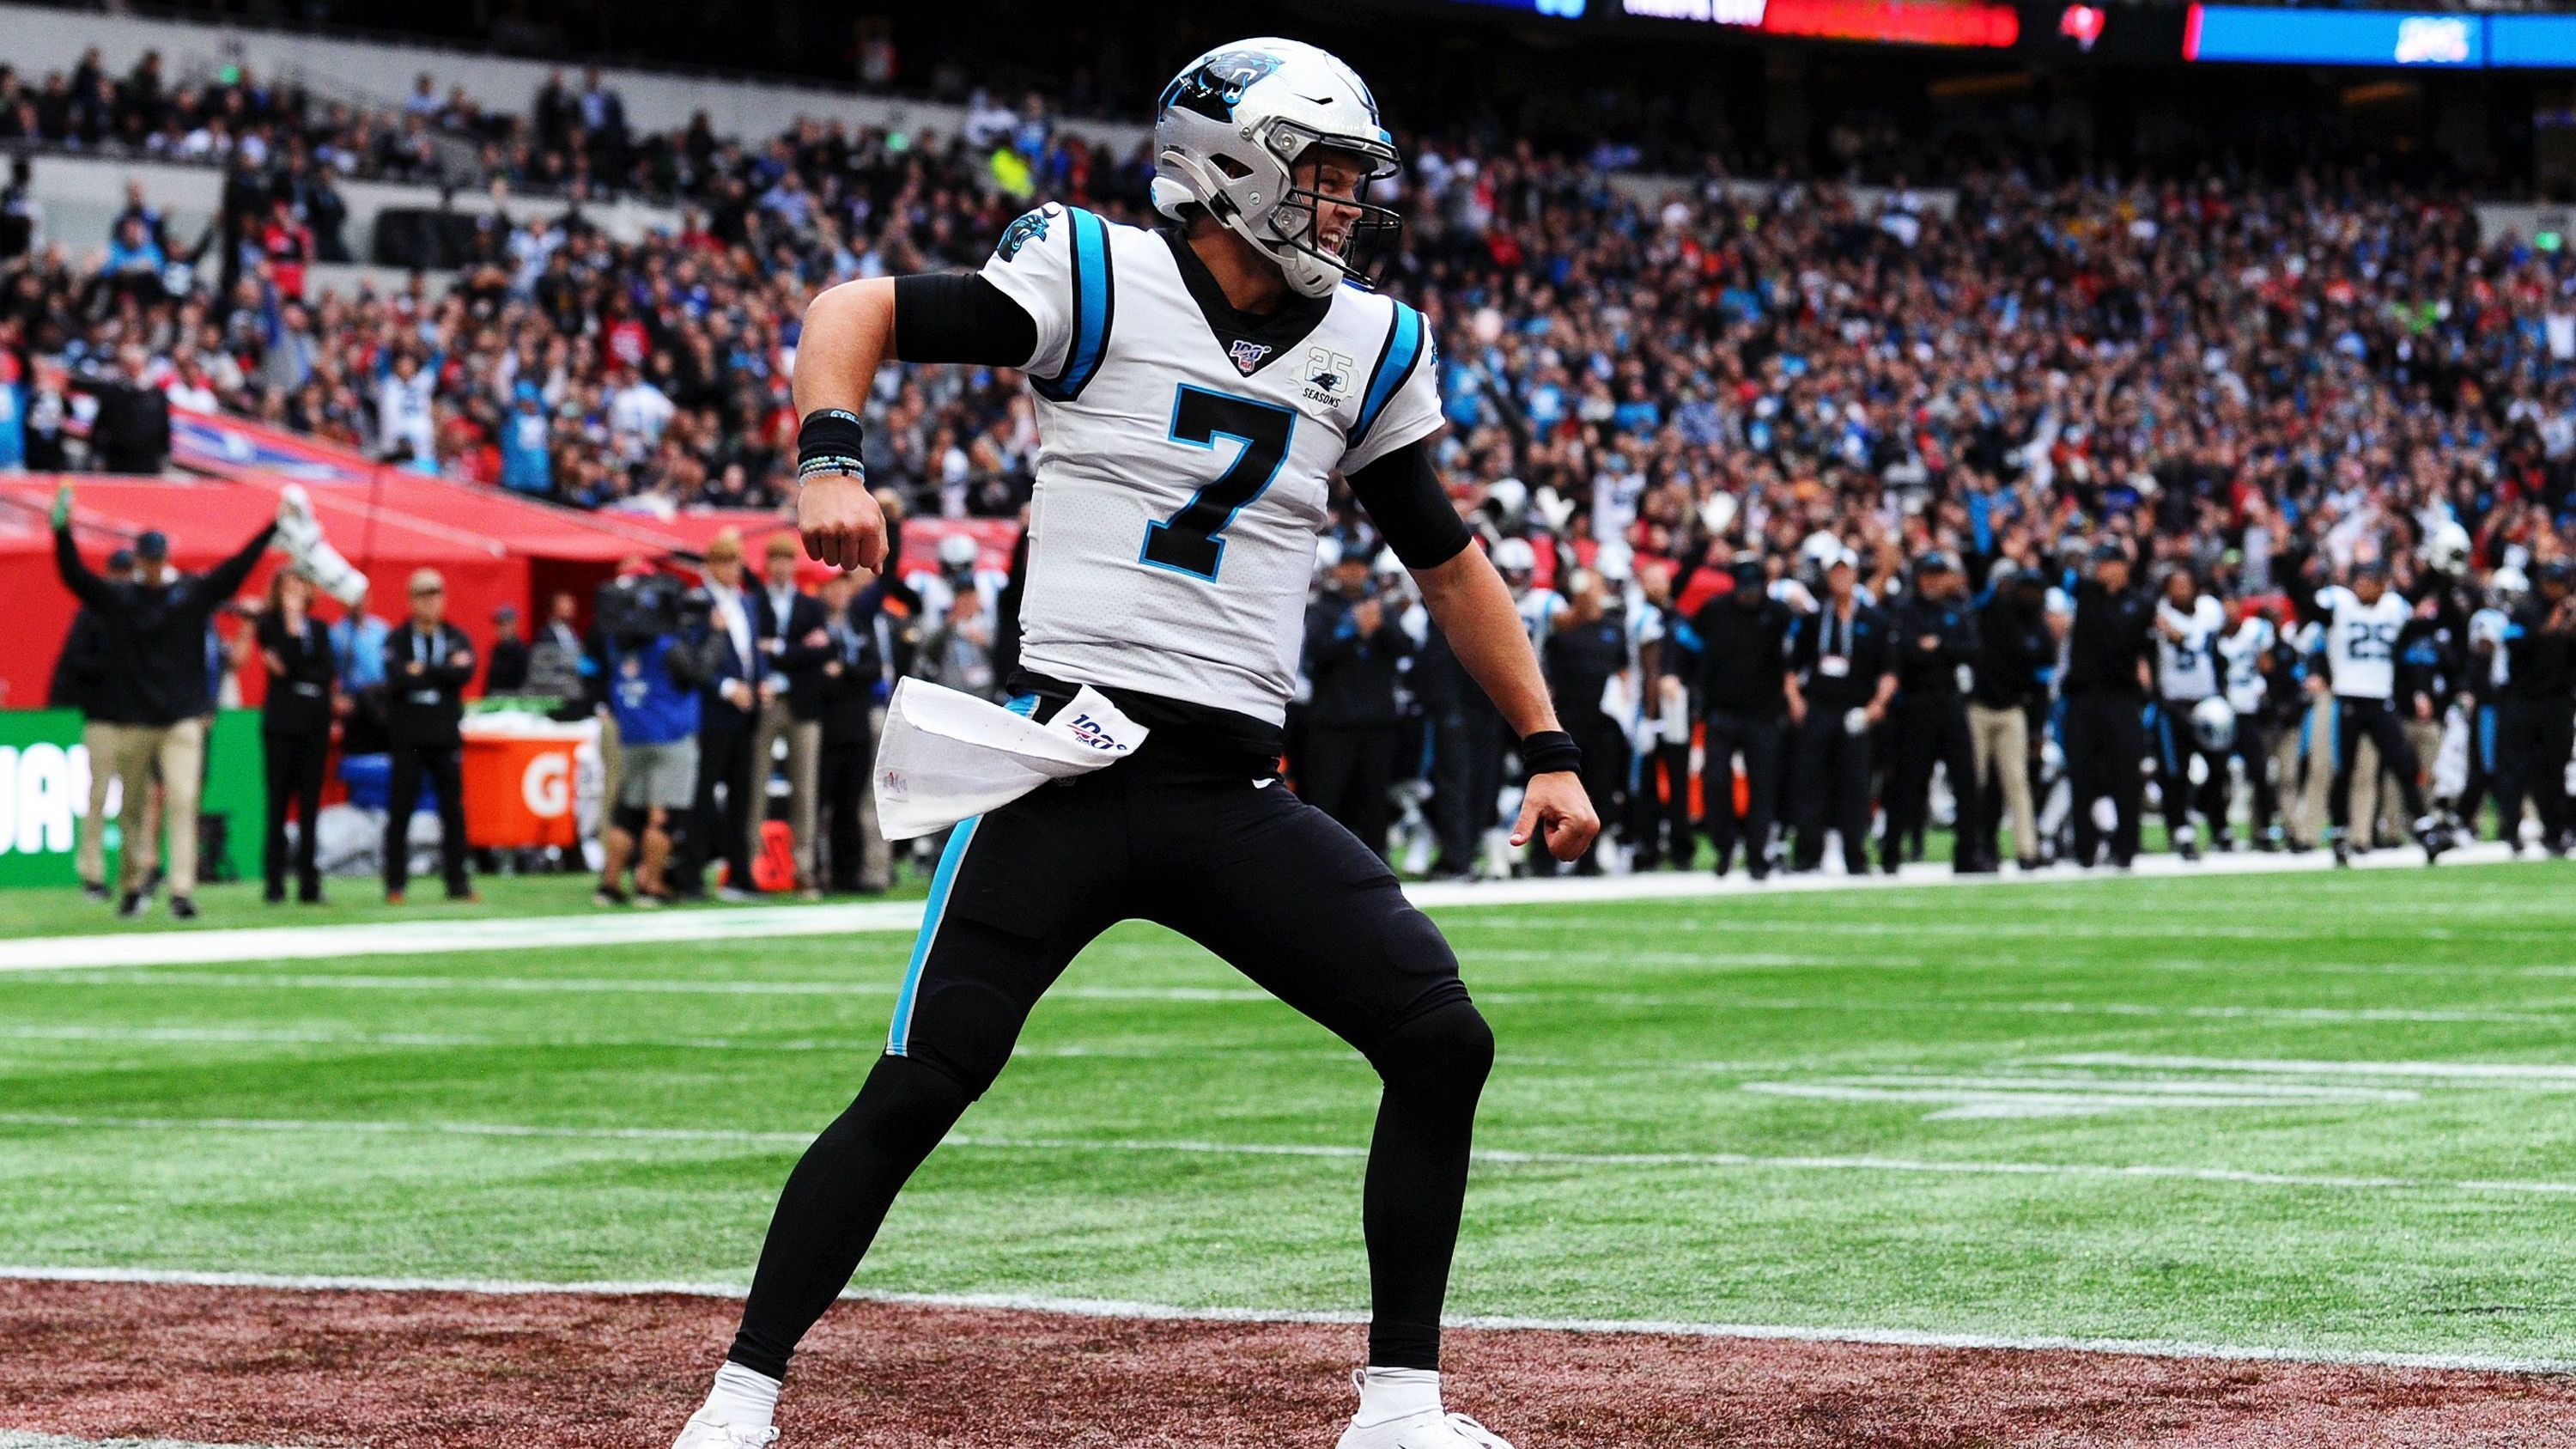 <strong>Carolina Panthers (1 Spiel im Ausland)</strong><br>- Spiele in London: 1 (2019; 37:26 vs. Tampa Bay Buccaneers)<br>- Spiele in Mexiko: -<br>- Spiele in Deutschland: -<br>- Spiele in Brasilien: -